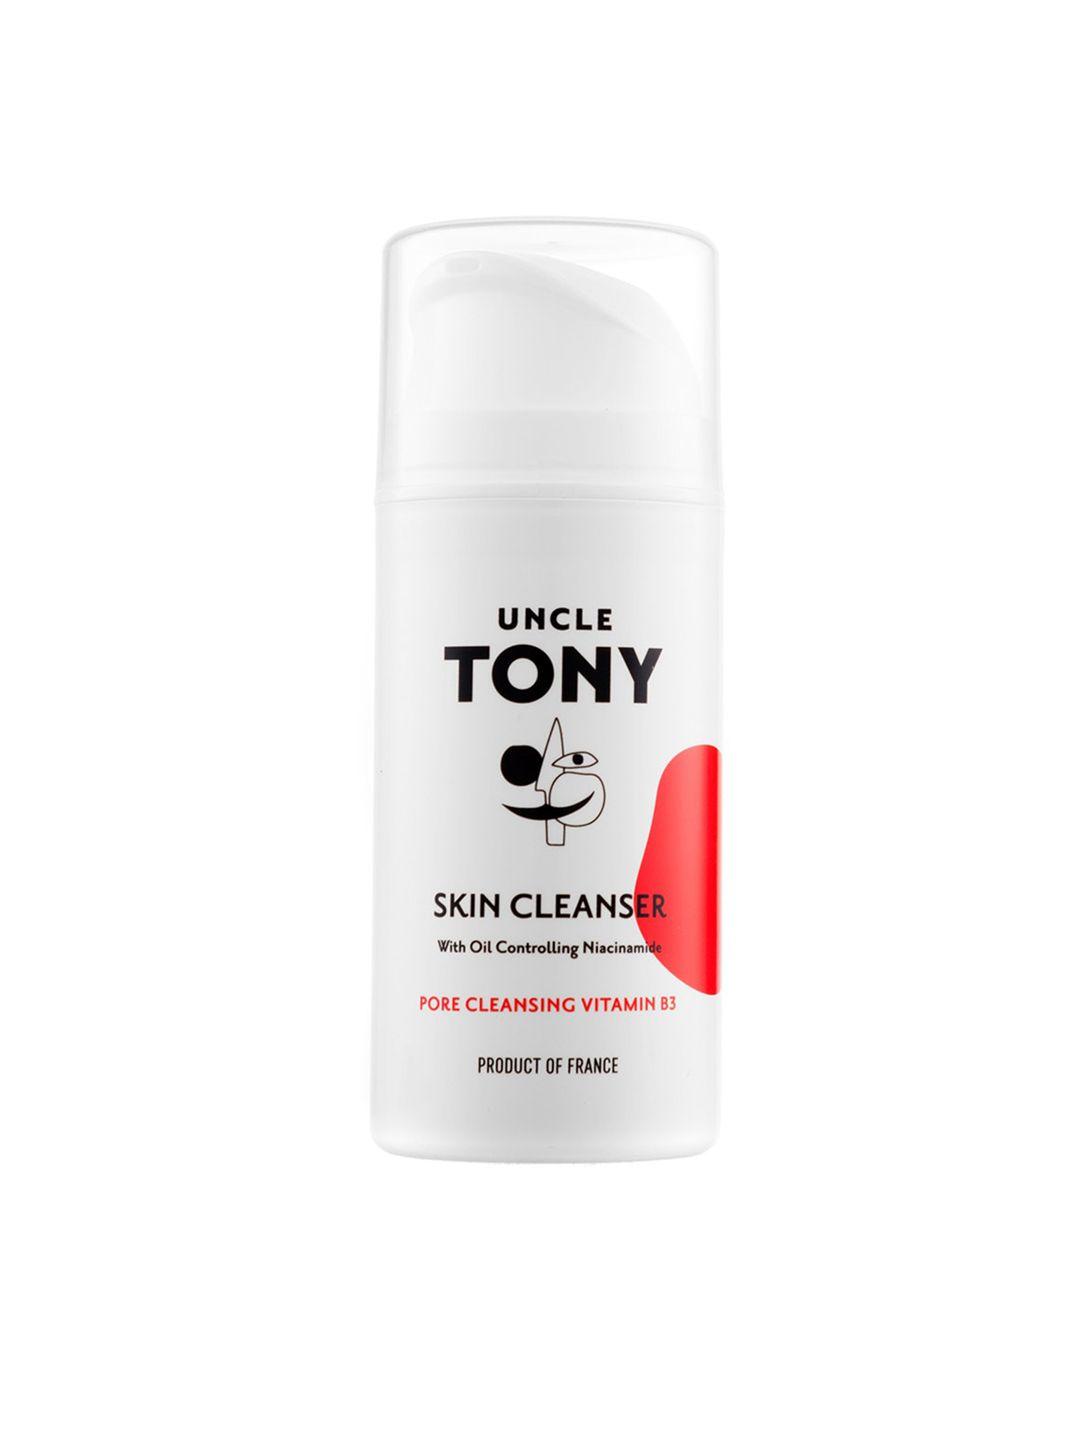 uncle tony skin cleanser with pore cleansing vitamin b3 - 100ml